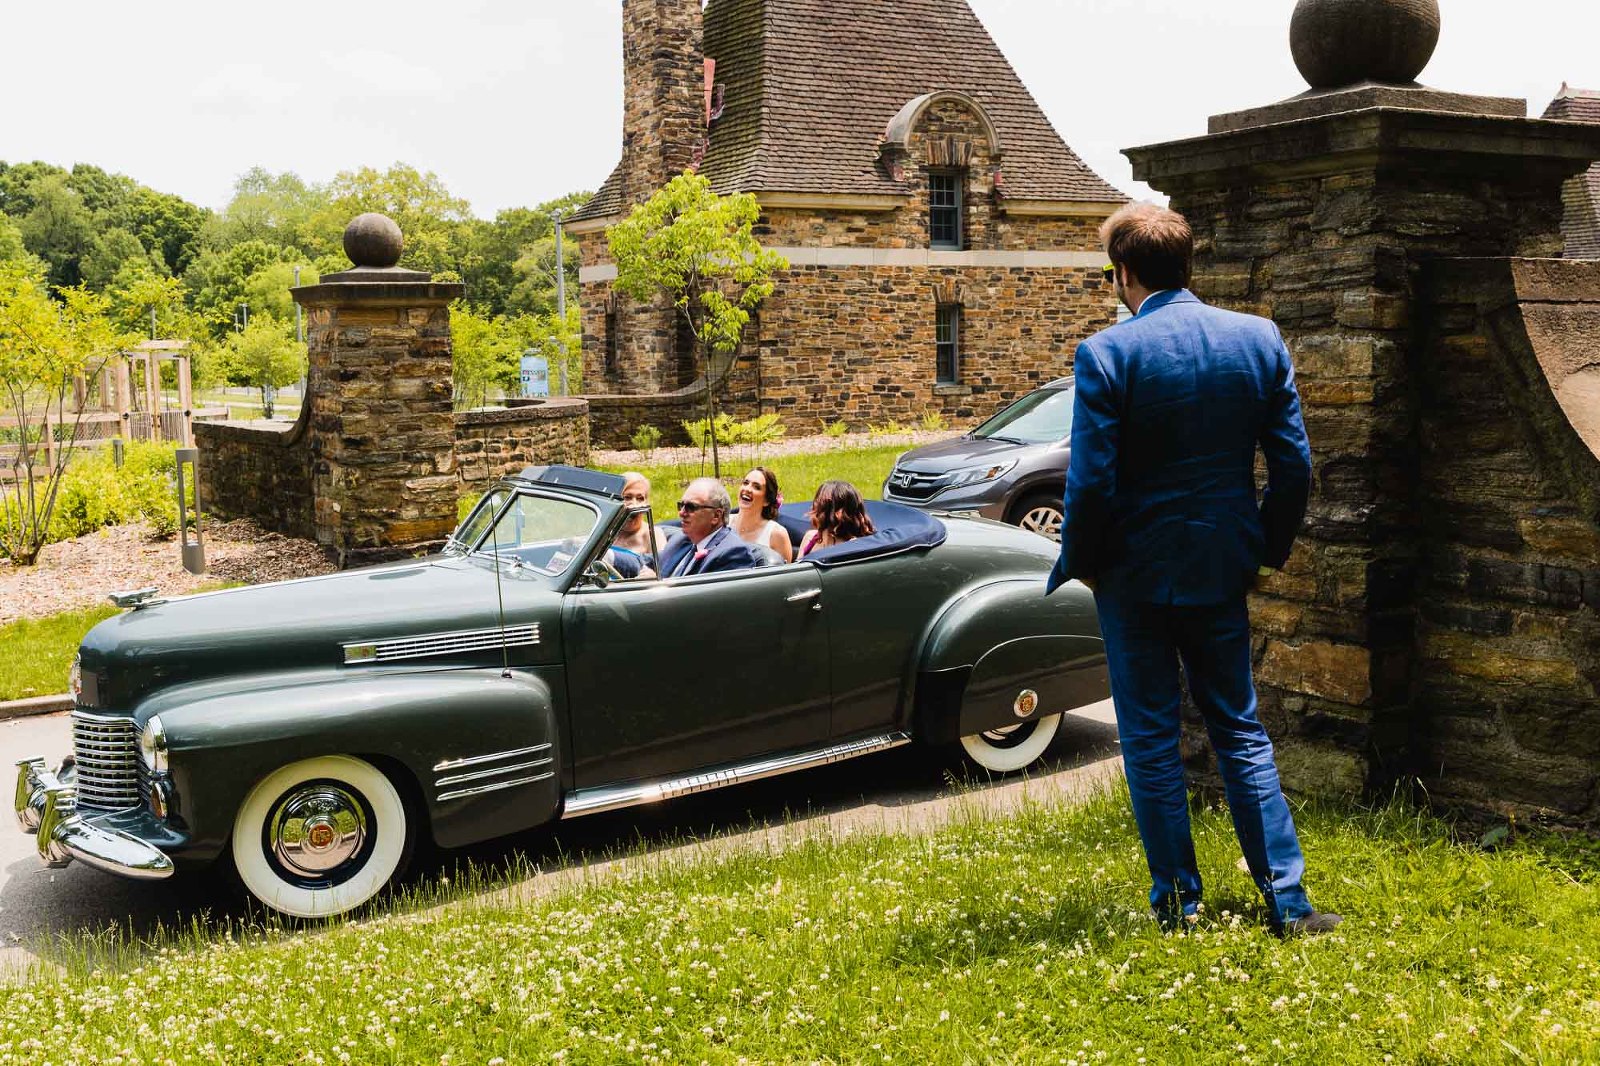 bride rides in an antique jaguar car with her parents, waving to her groom standing nearby